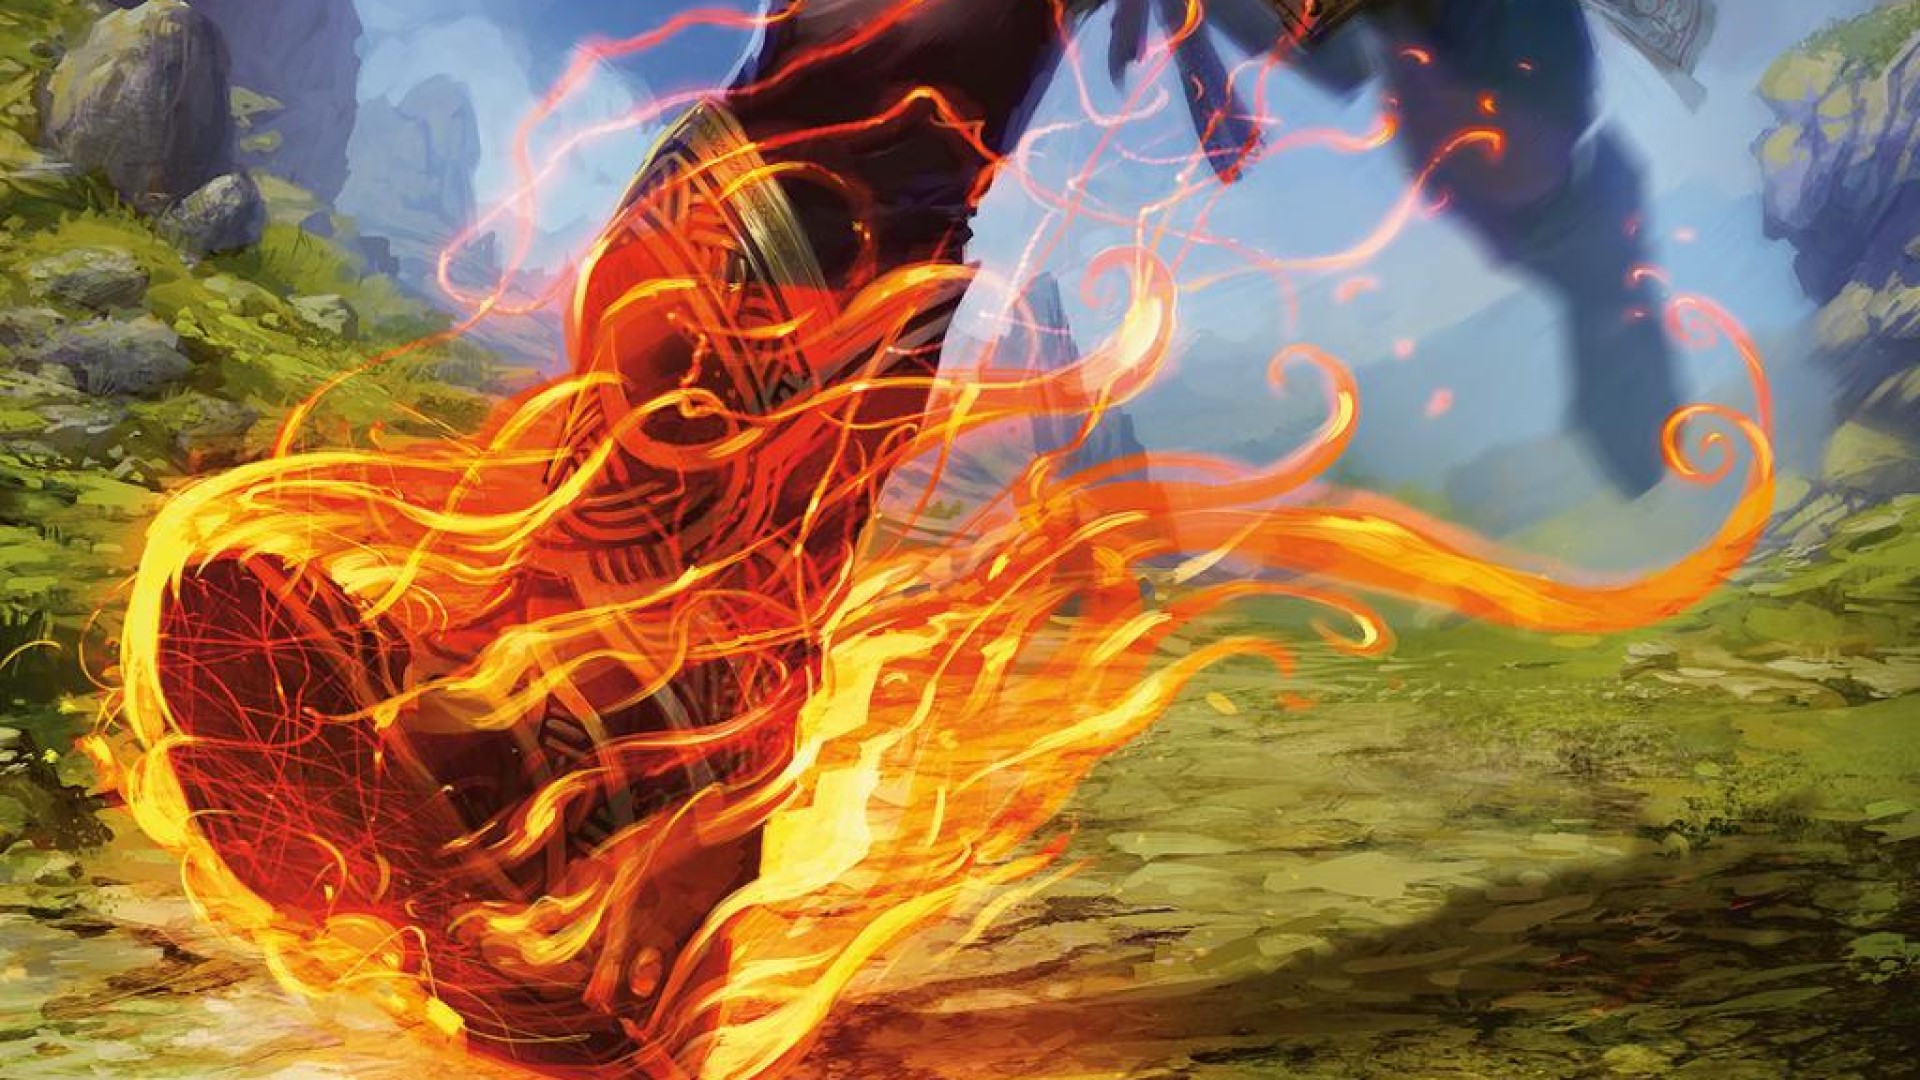 MTG hexproof: Artwork of a person running wearing flaming boots.